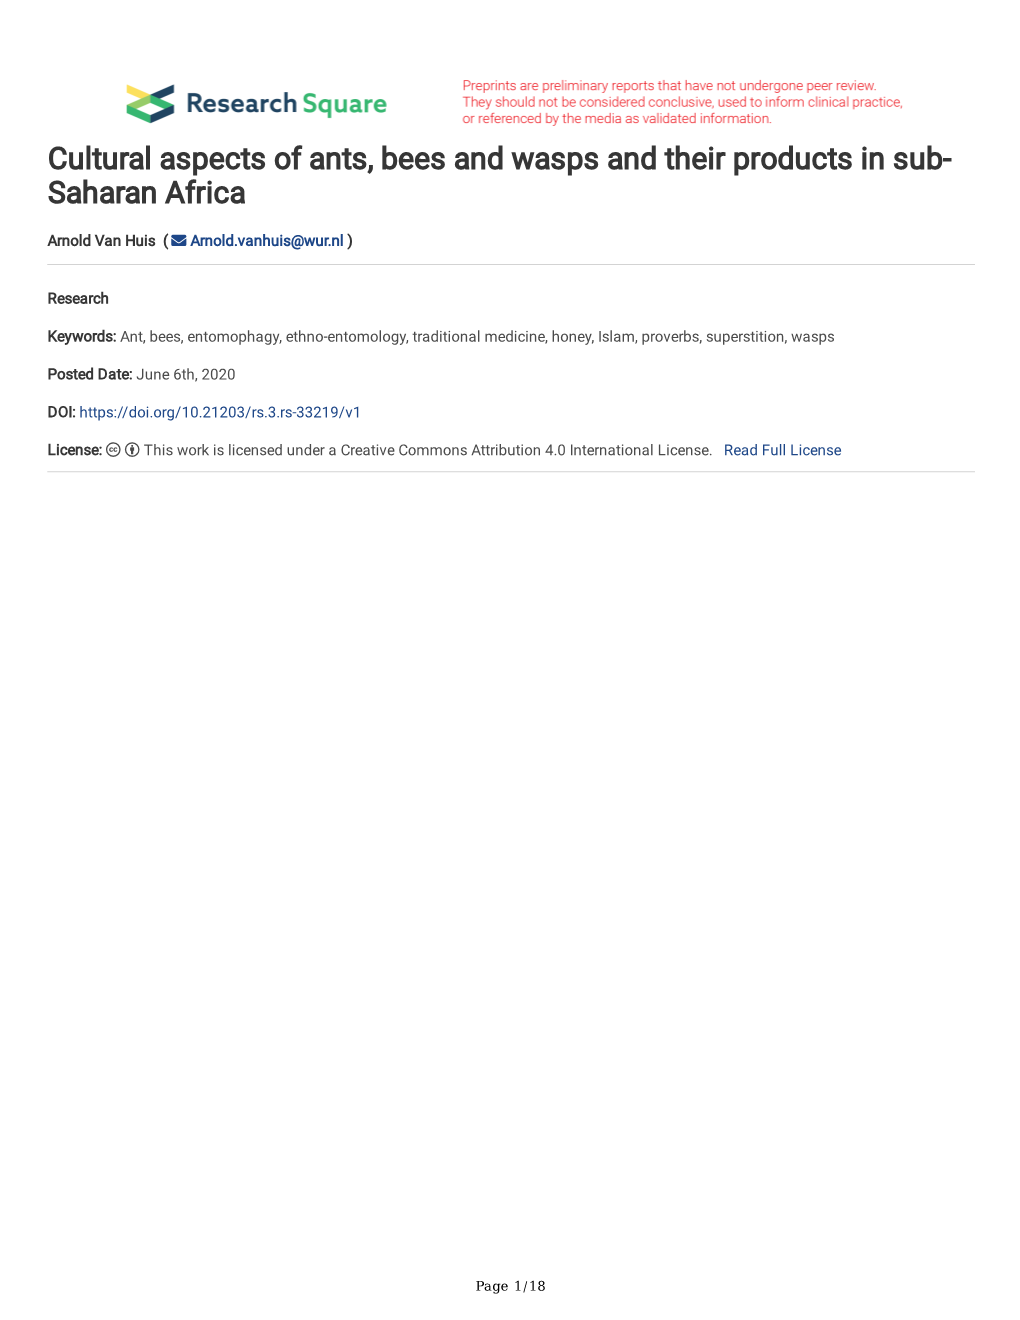 Cultural Aspects of Ants, Bees and Wasps and Their Products in Sub- Saharan Africa